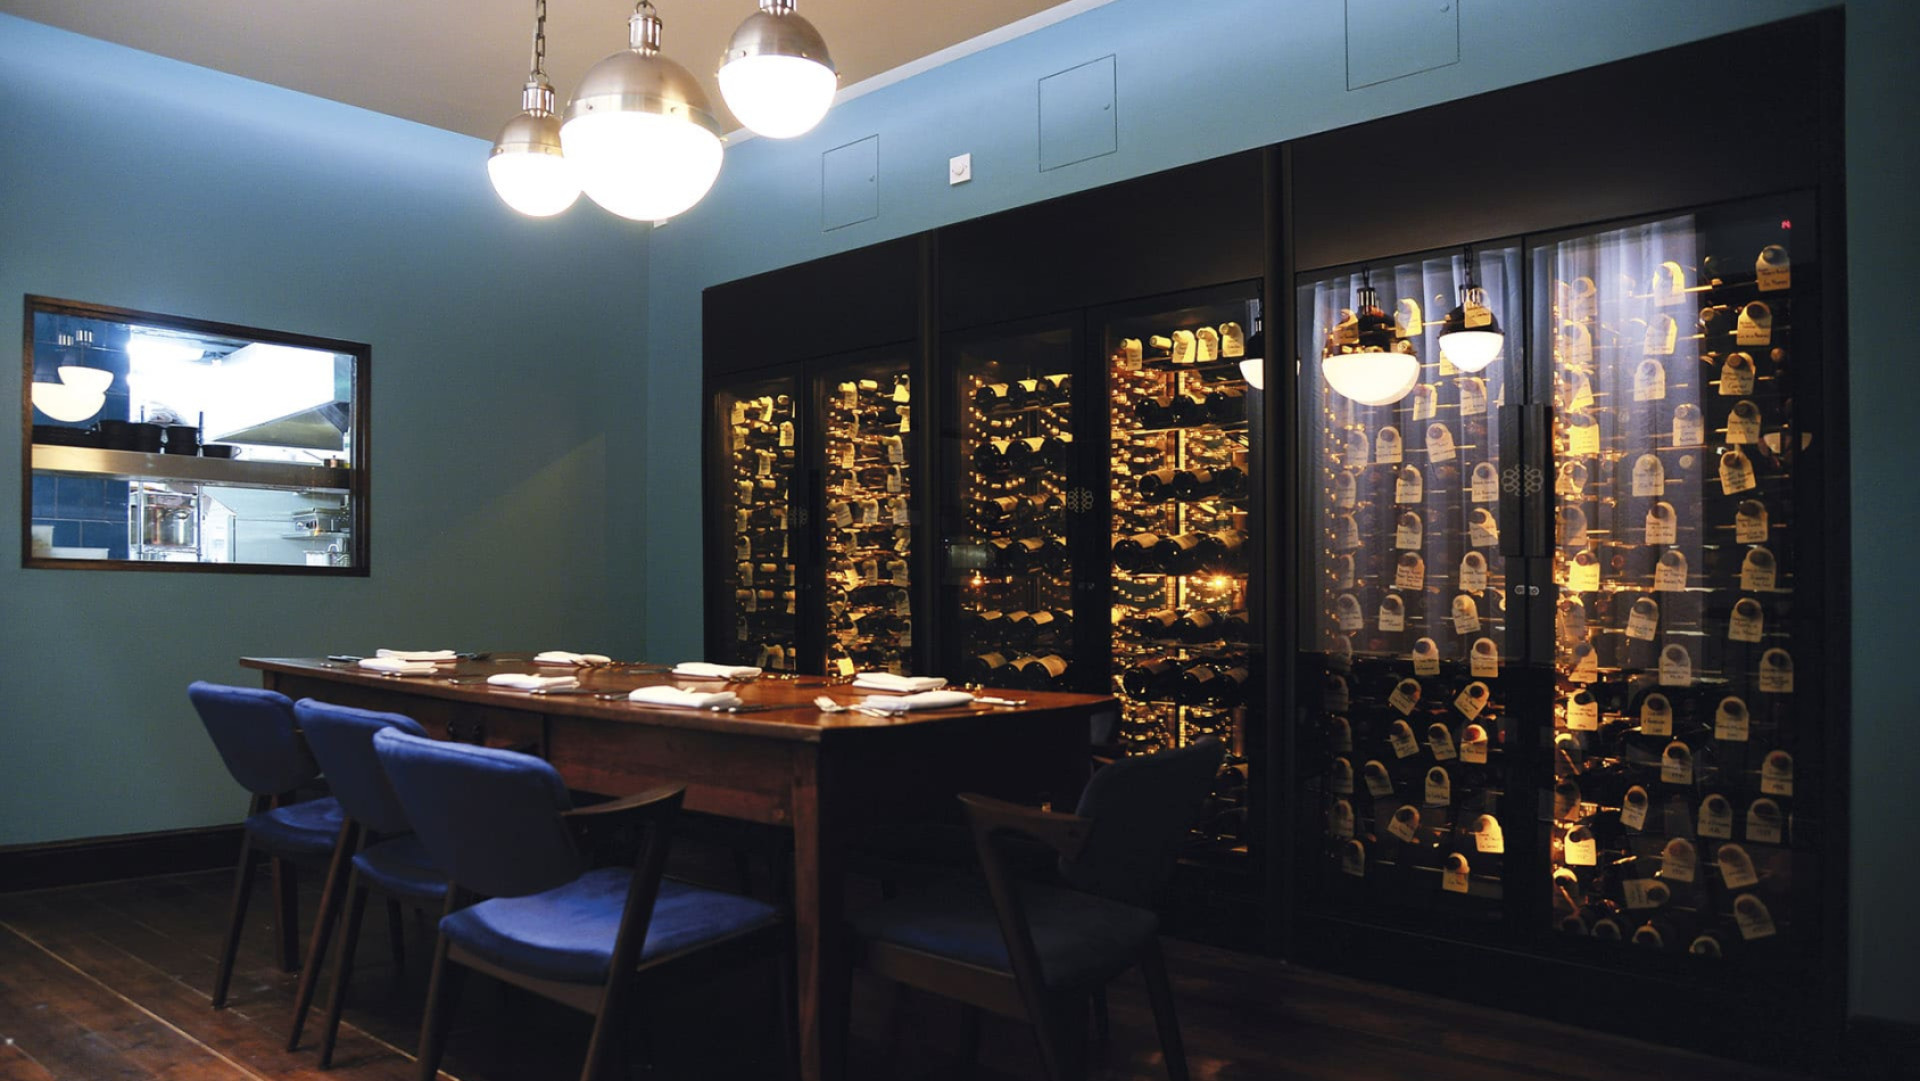 Discover the most beautiful installations and layouts of restaurants, hotels, wine bars in which our wine display cases and storage allow you to create the most original interior designs.